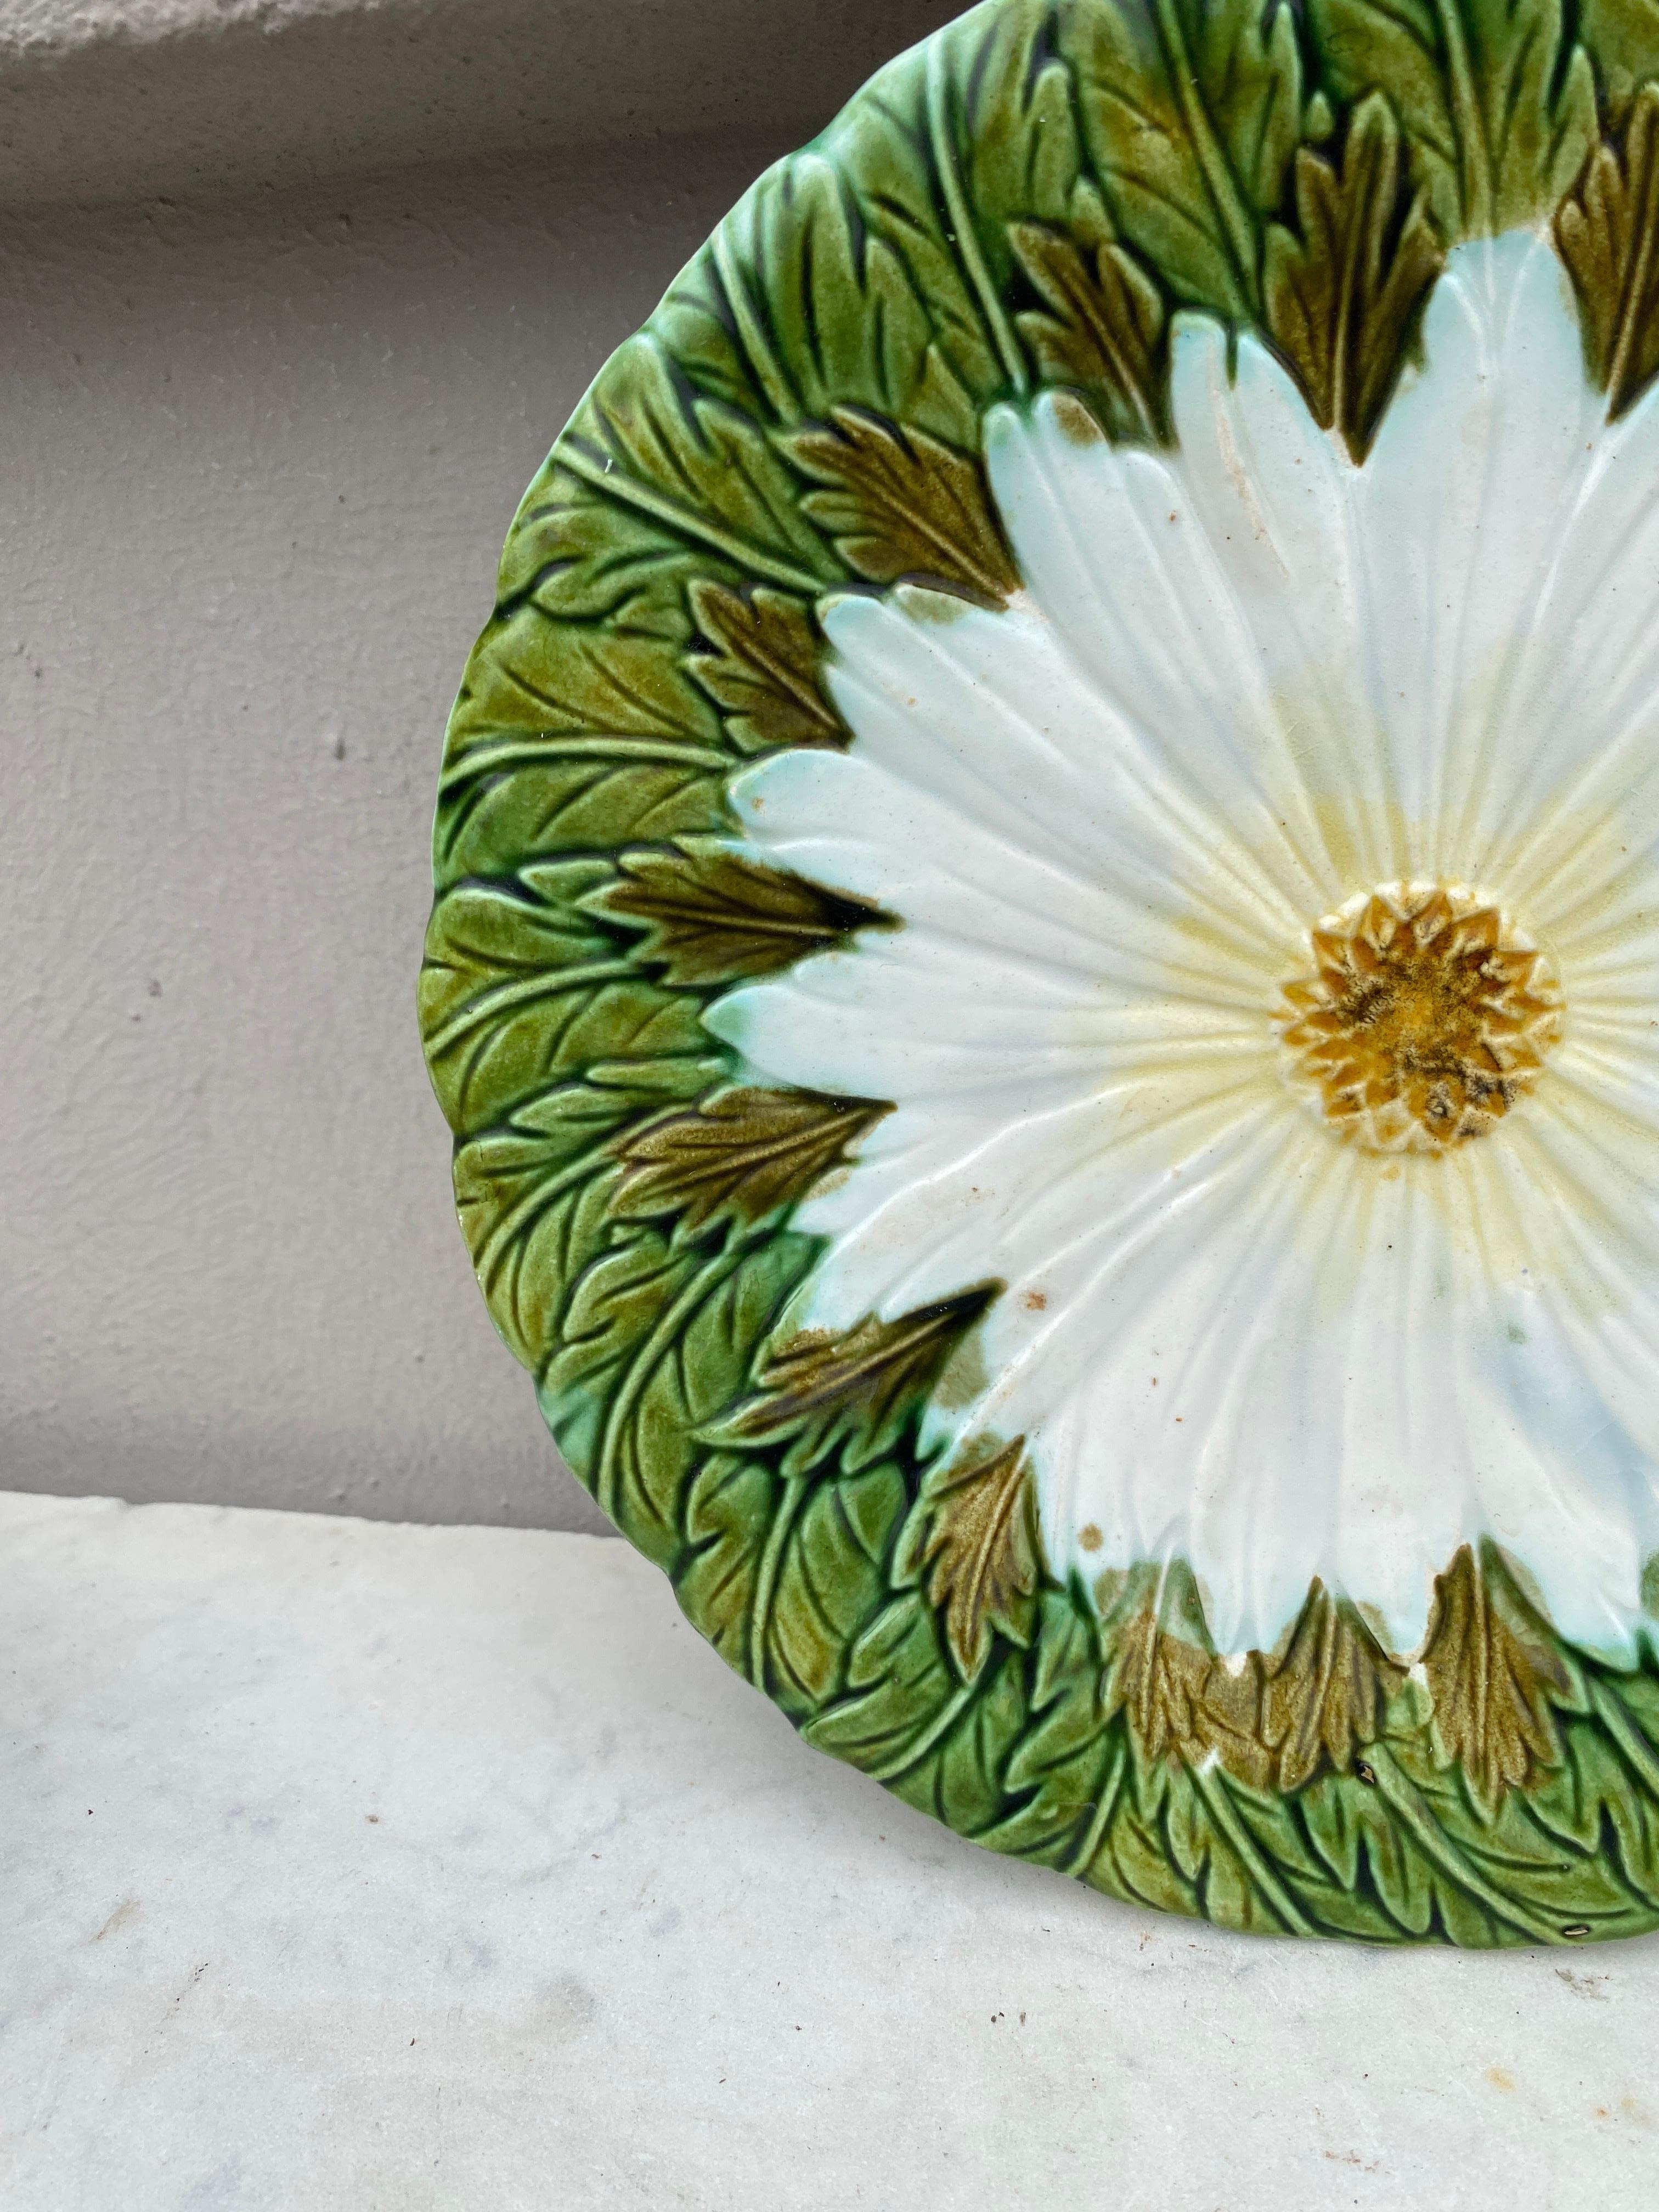 Art Nouveau French Majolica Daisy Plate Orchies, circa 1890 For Sale